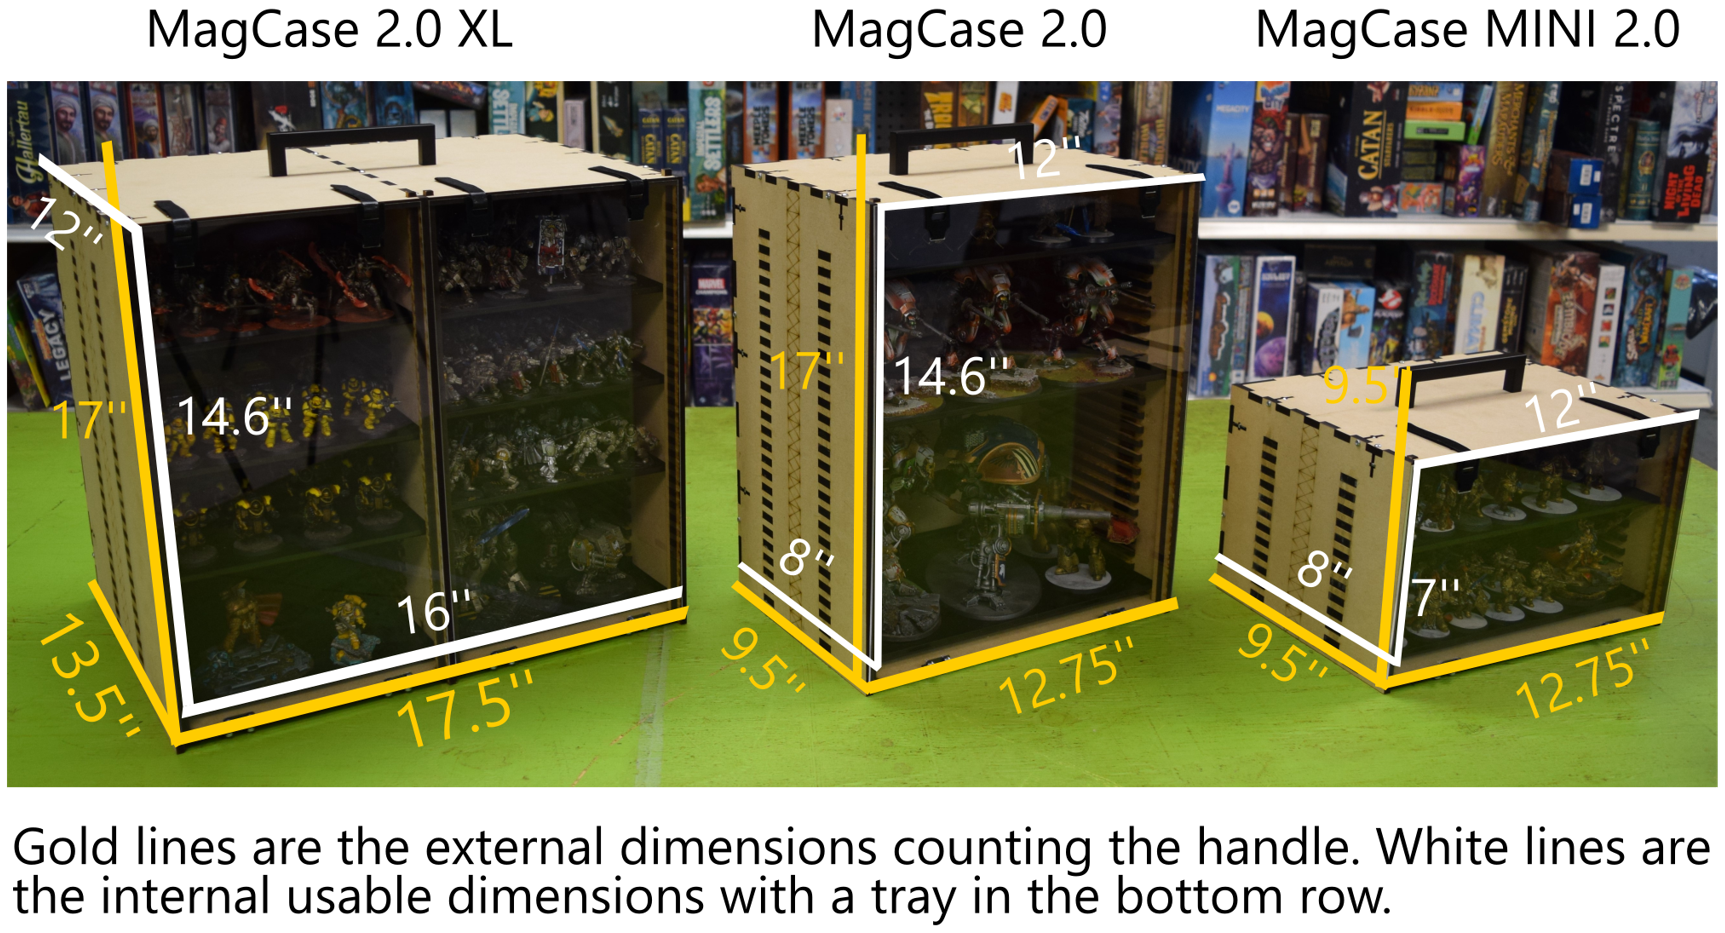 Magcase MINI 2.0 MDF Magnetic Carrying Case / Display Case for Miniatures /  Miniature Storage Designed for Warhammer 40k, Aos, Dnd, and More -   Israel